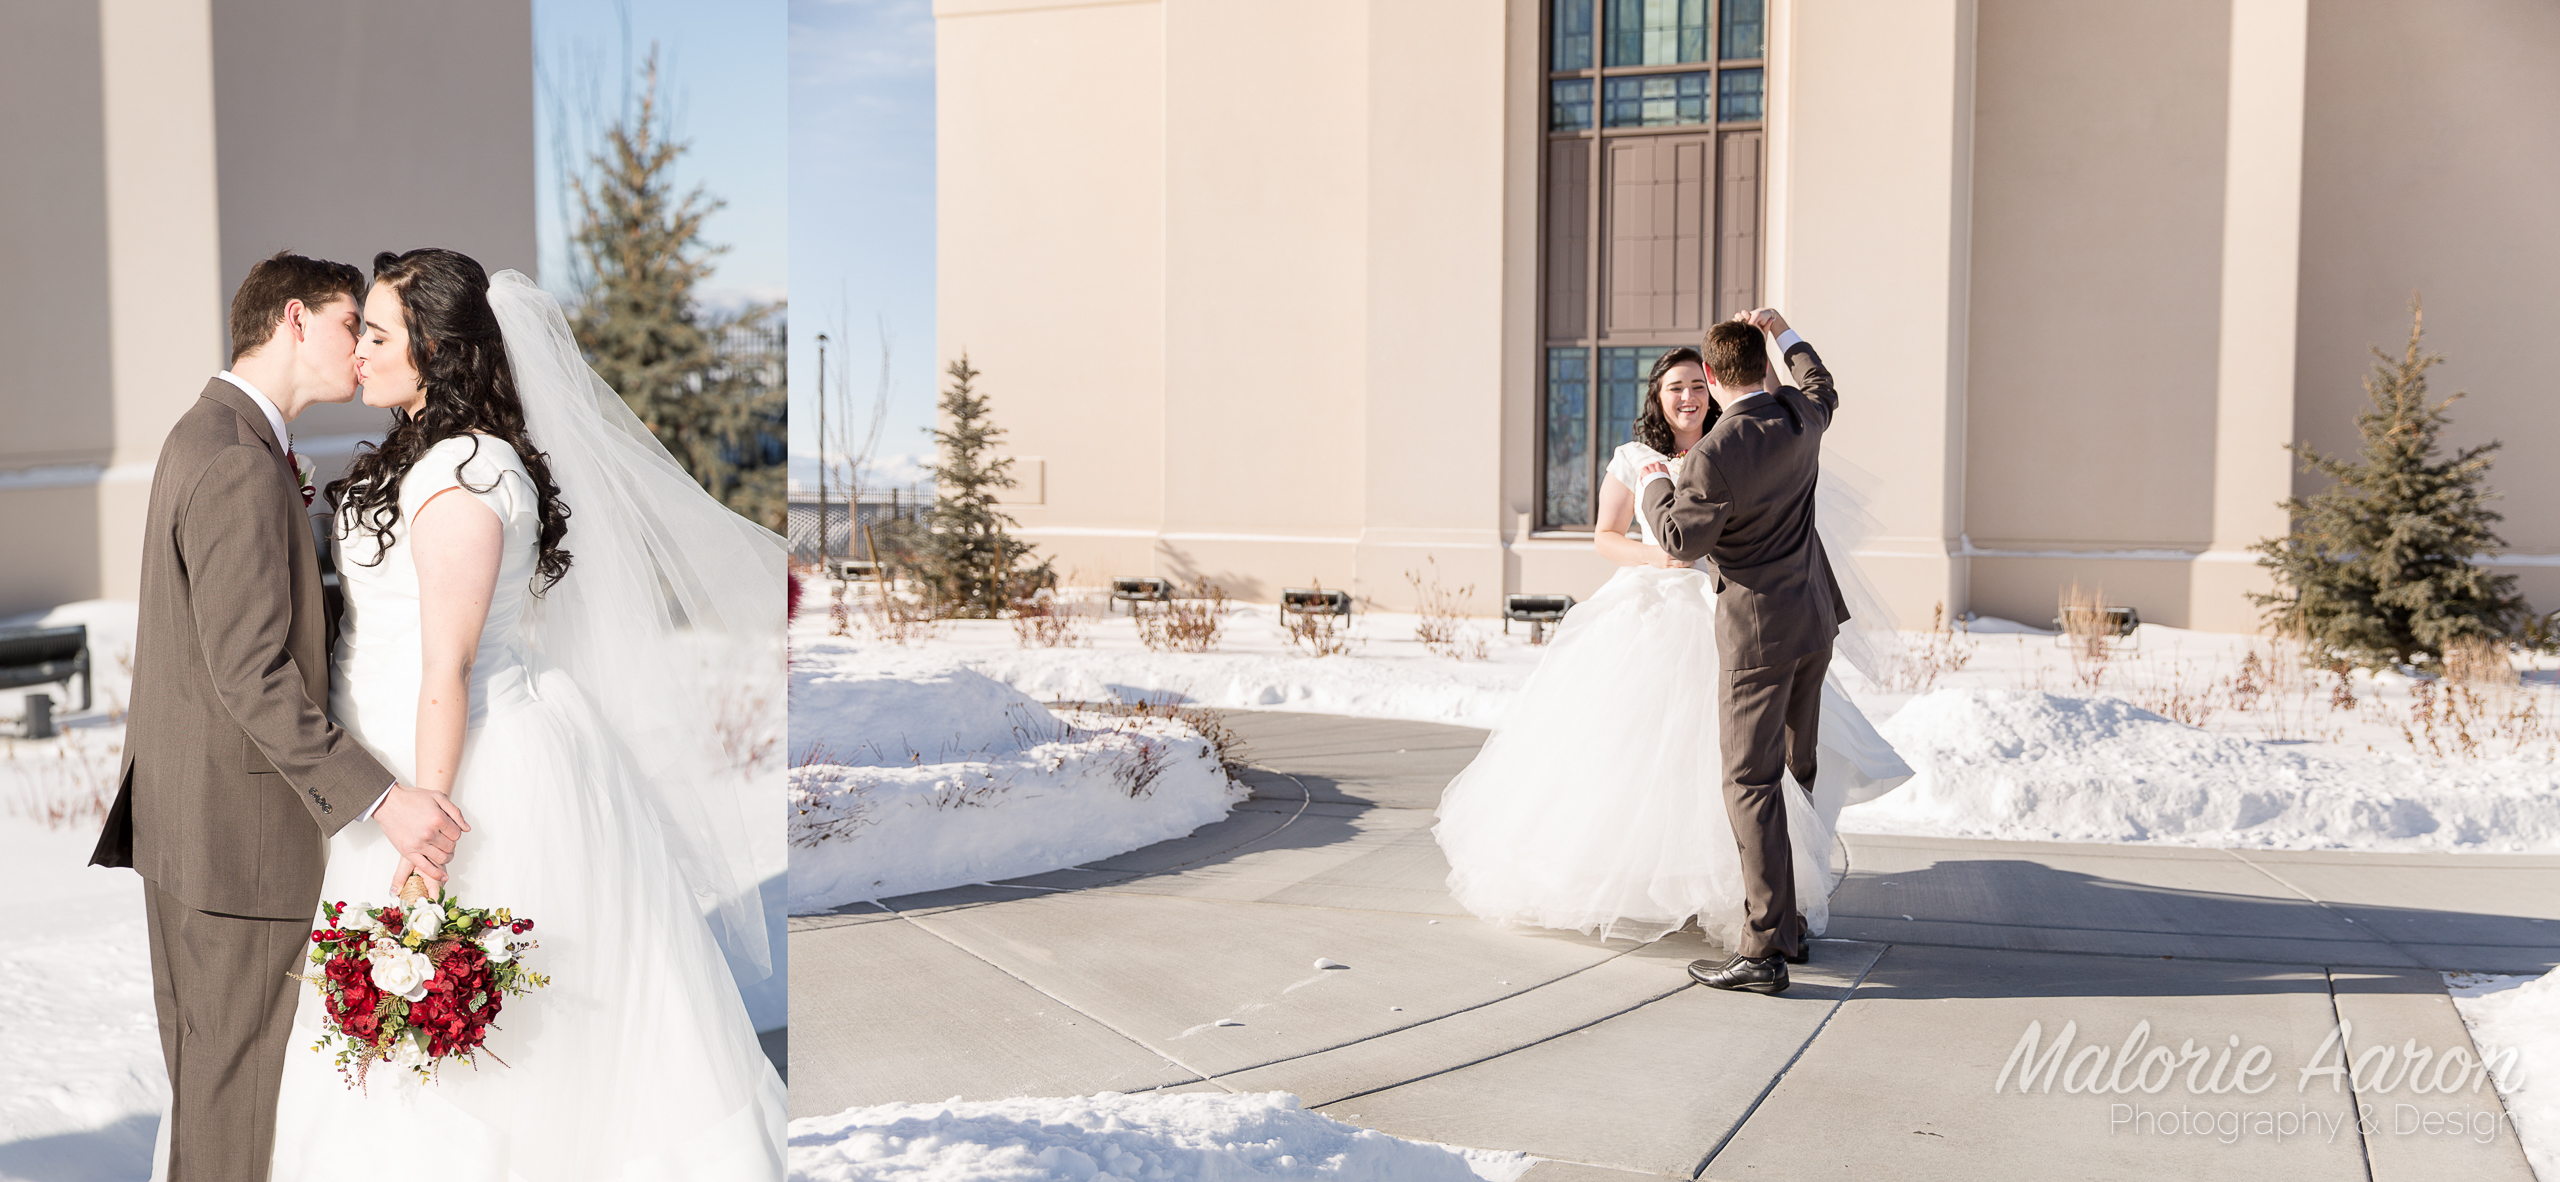 MalorieAaron, Photography, StarValley, Wyoming, LDS, Temple, wedding, winter, fun_wedding_pictures